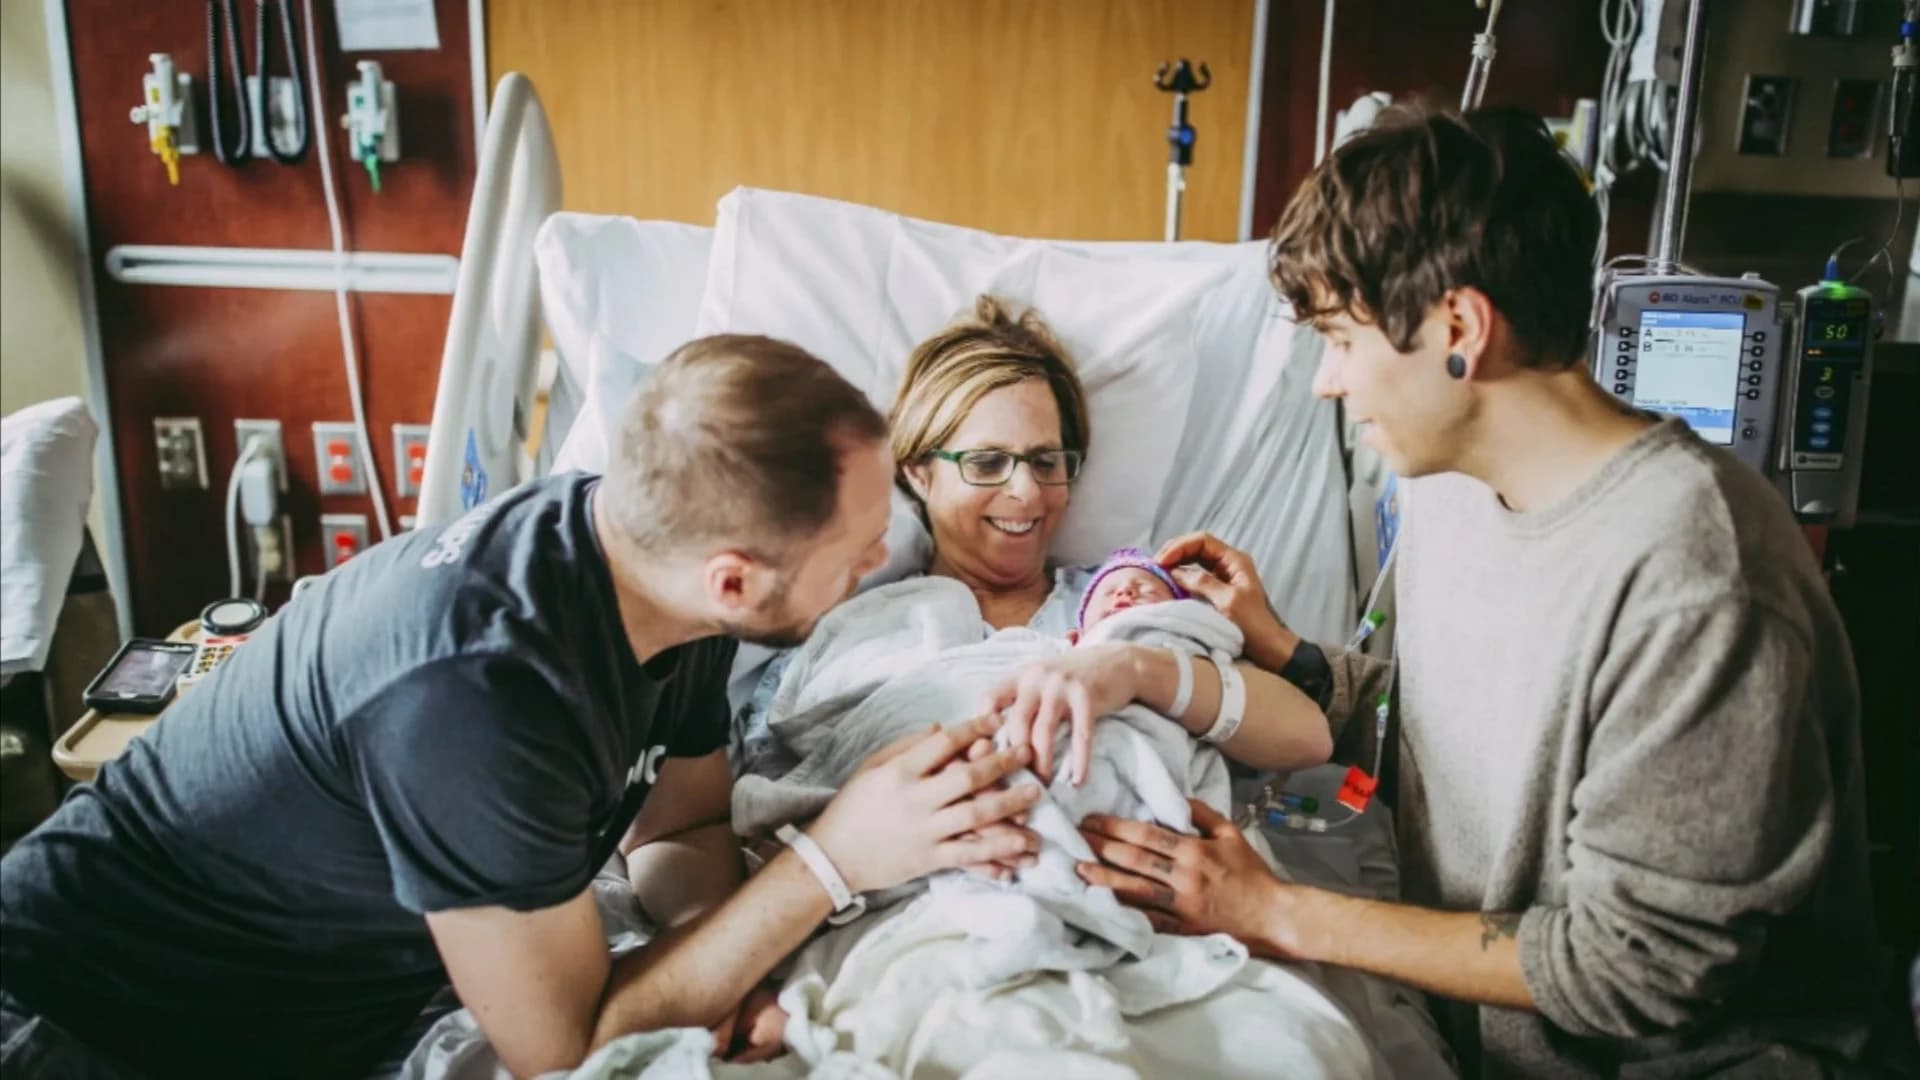 A grandmother’s love - Nebraska woman gives birth to own granddaughter